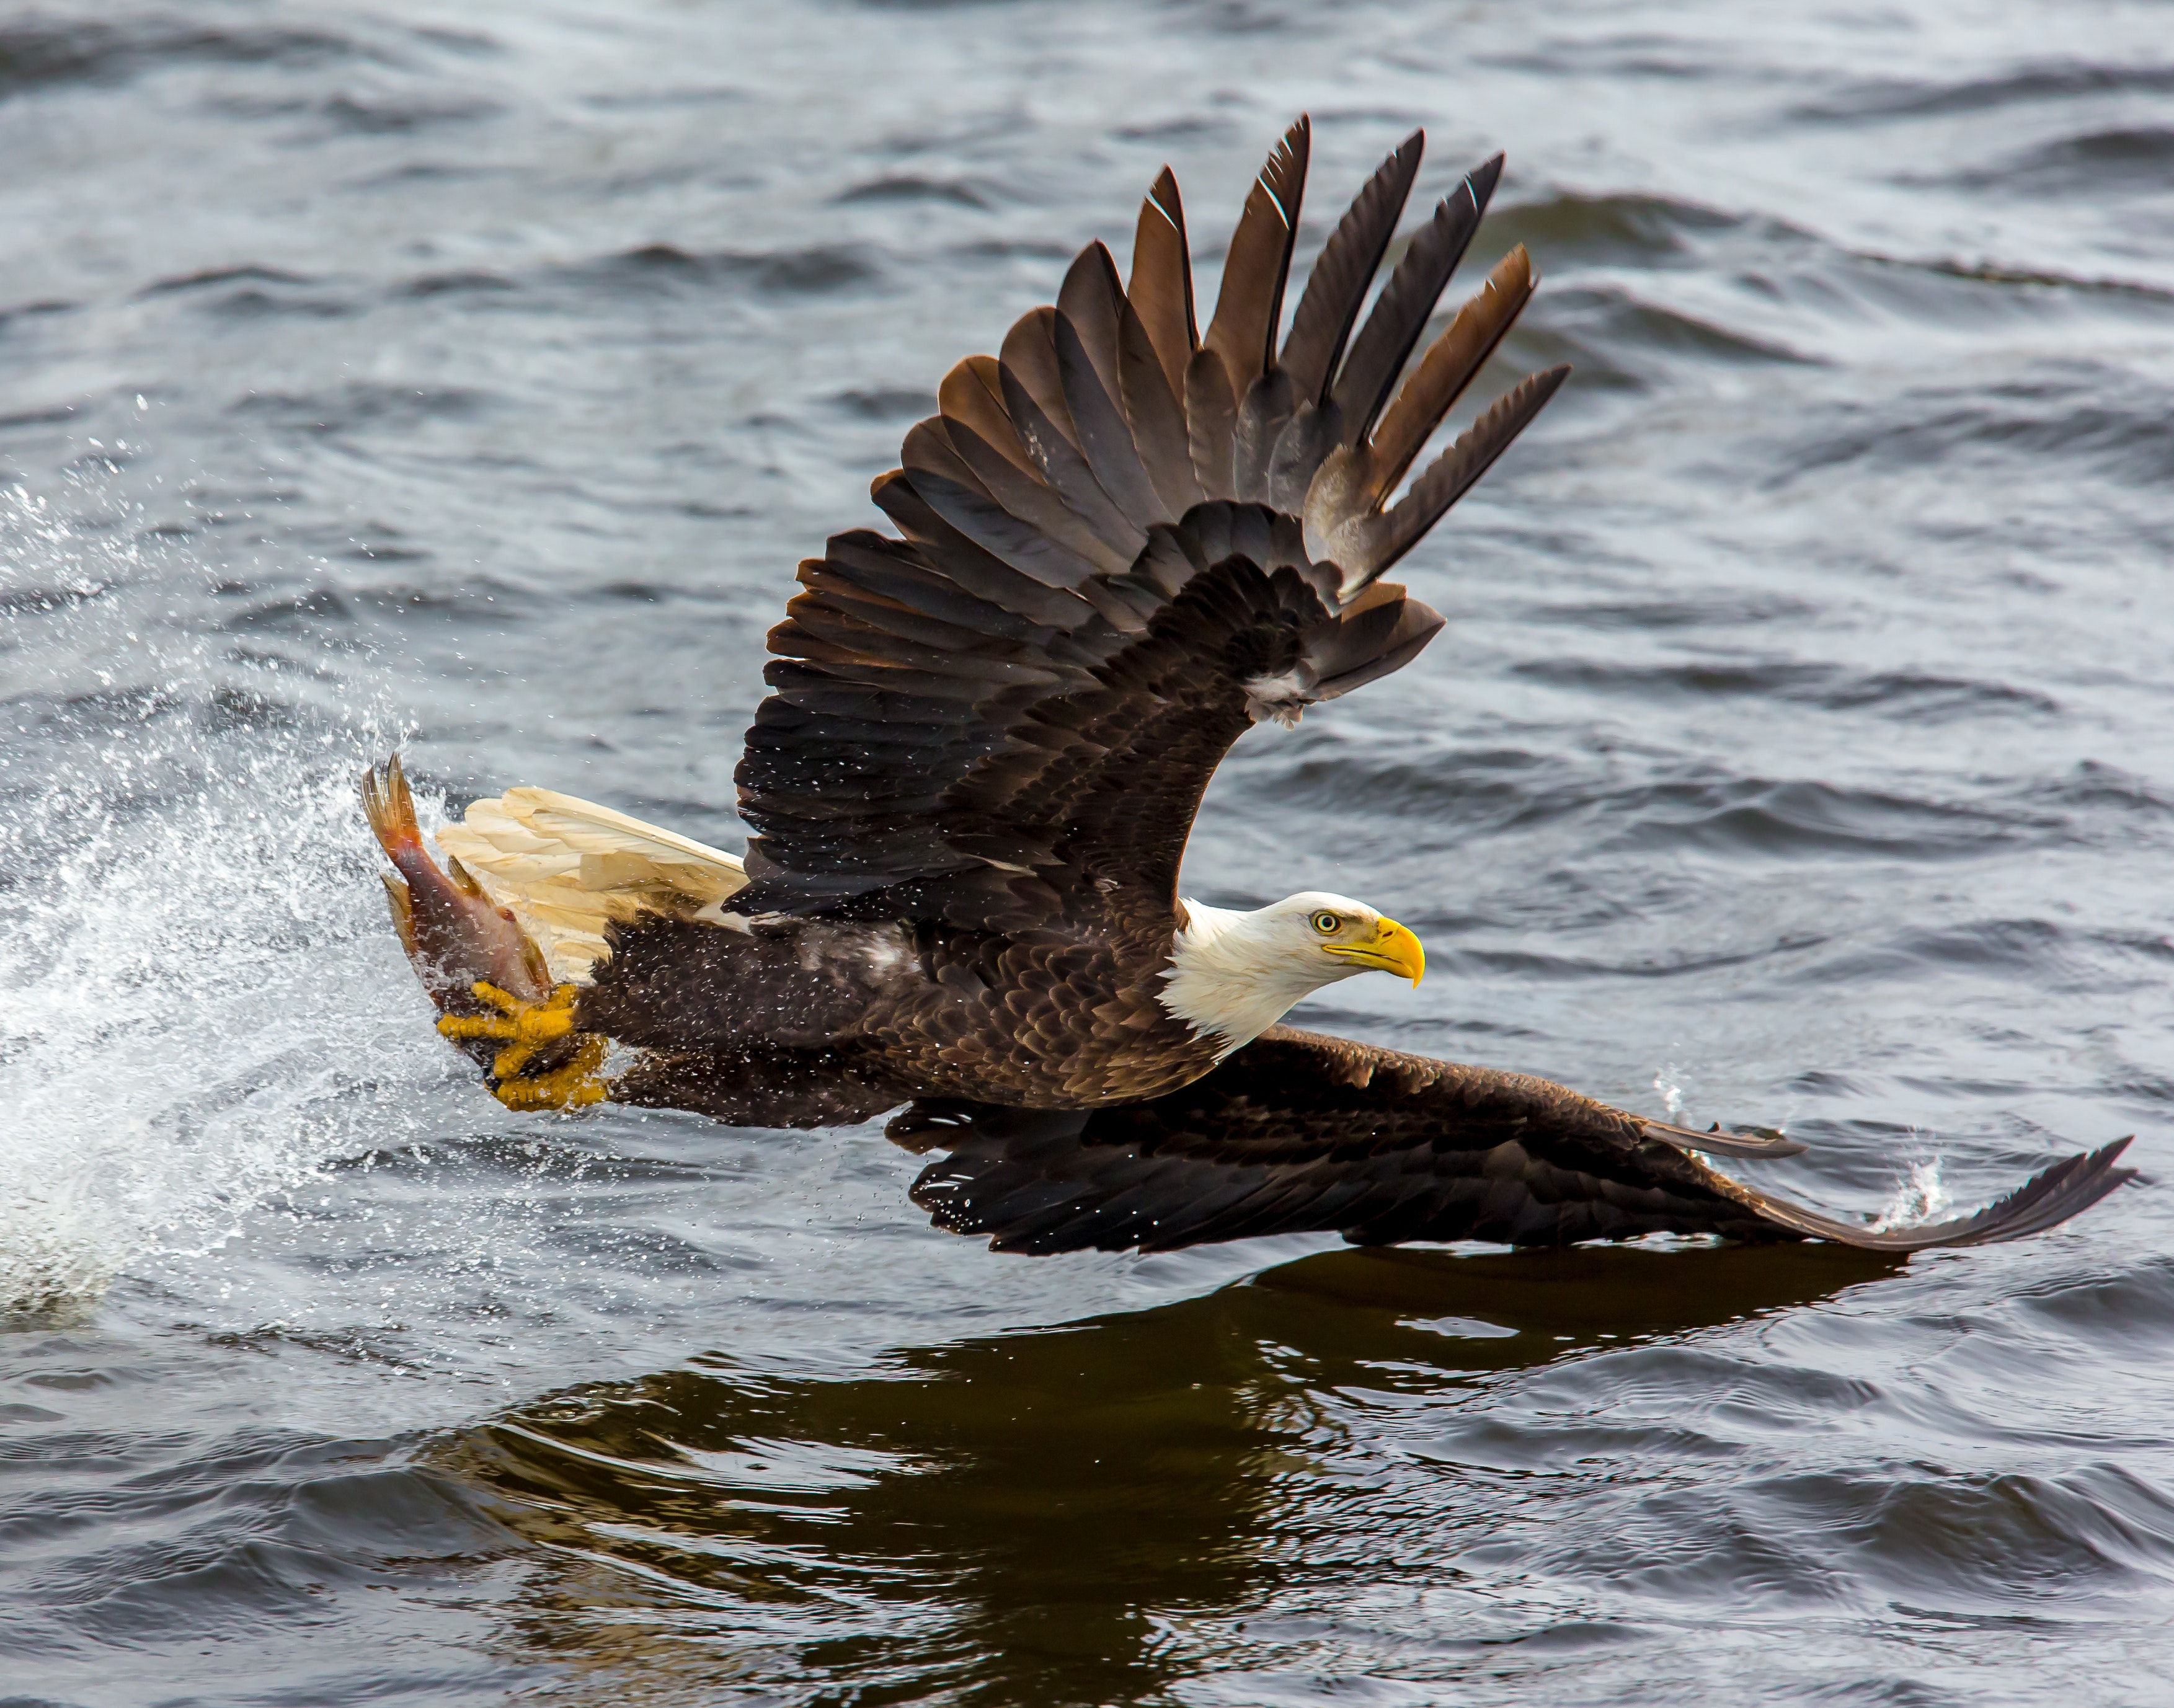 Bald eagle over the body of water photo